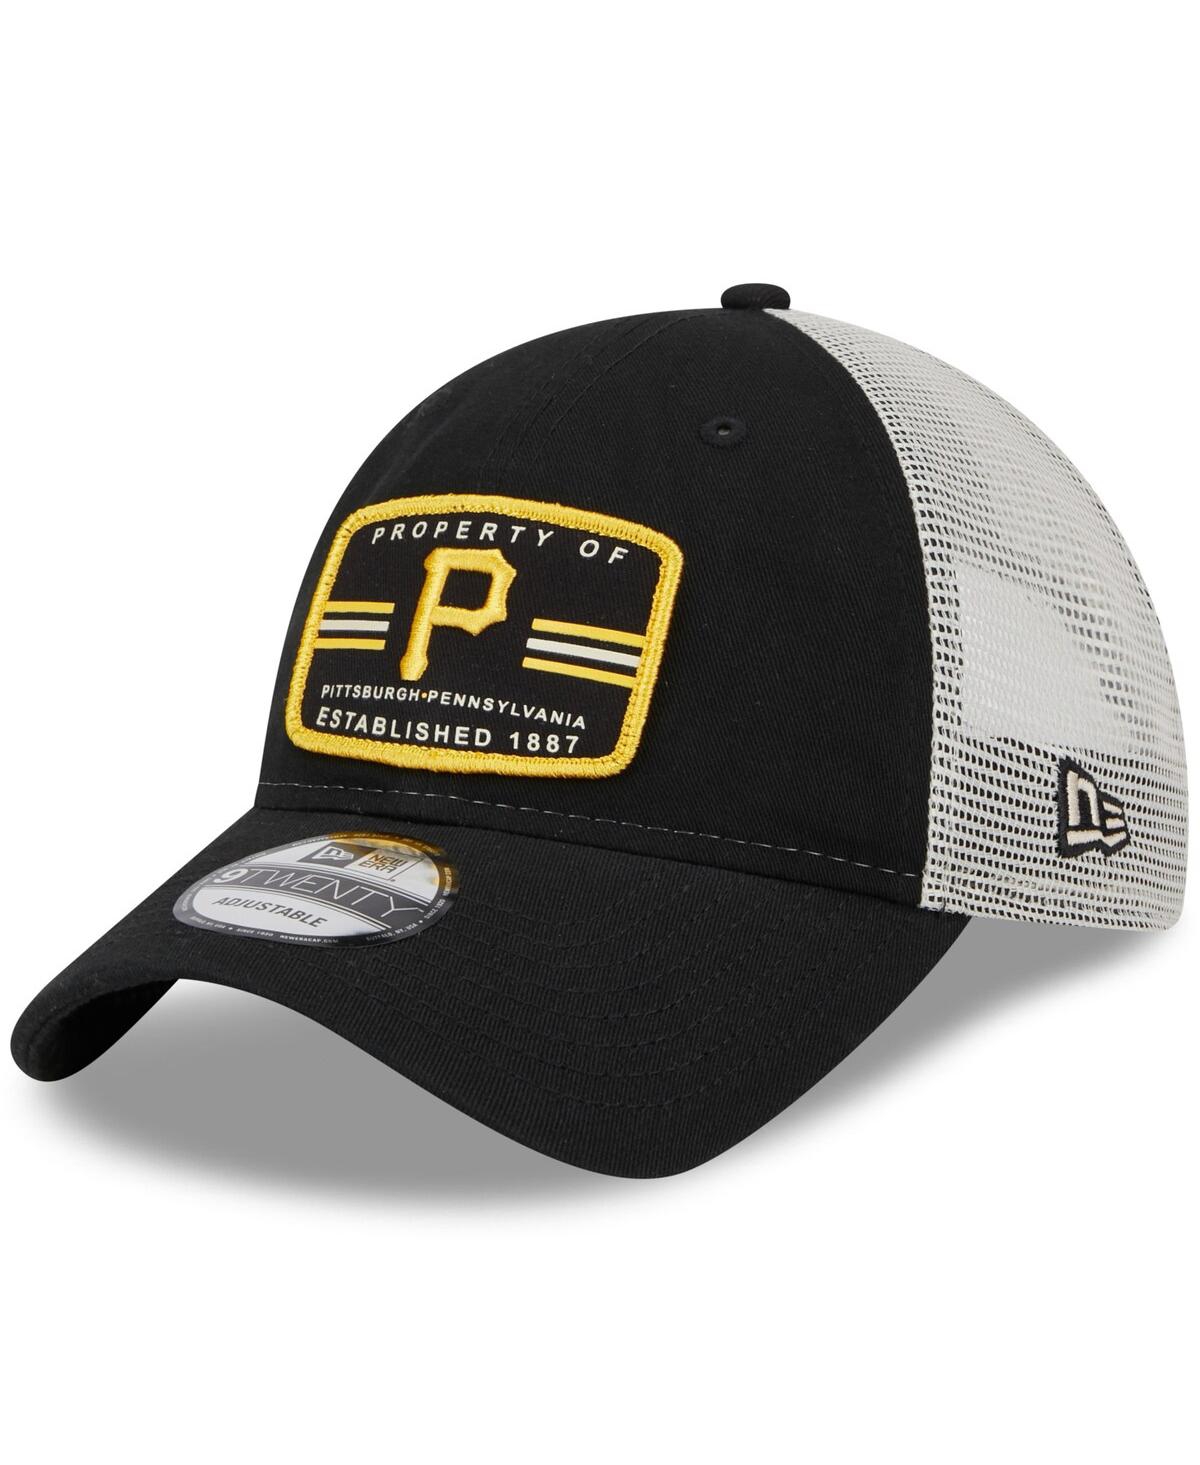 New Era Backletter Arch 9FIFTY Pittsburgh Pirates Snapback Hat